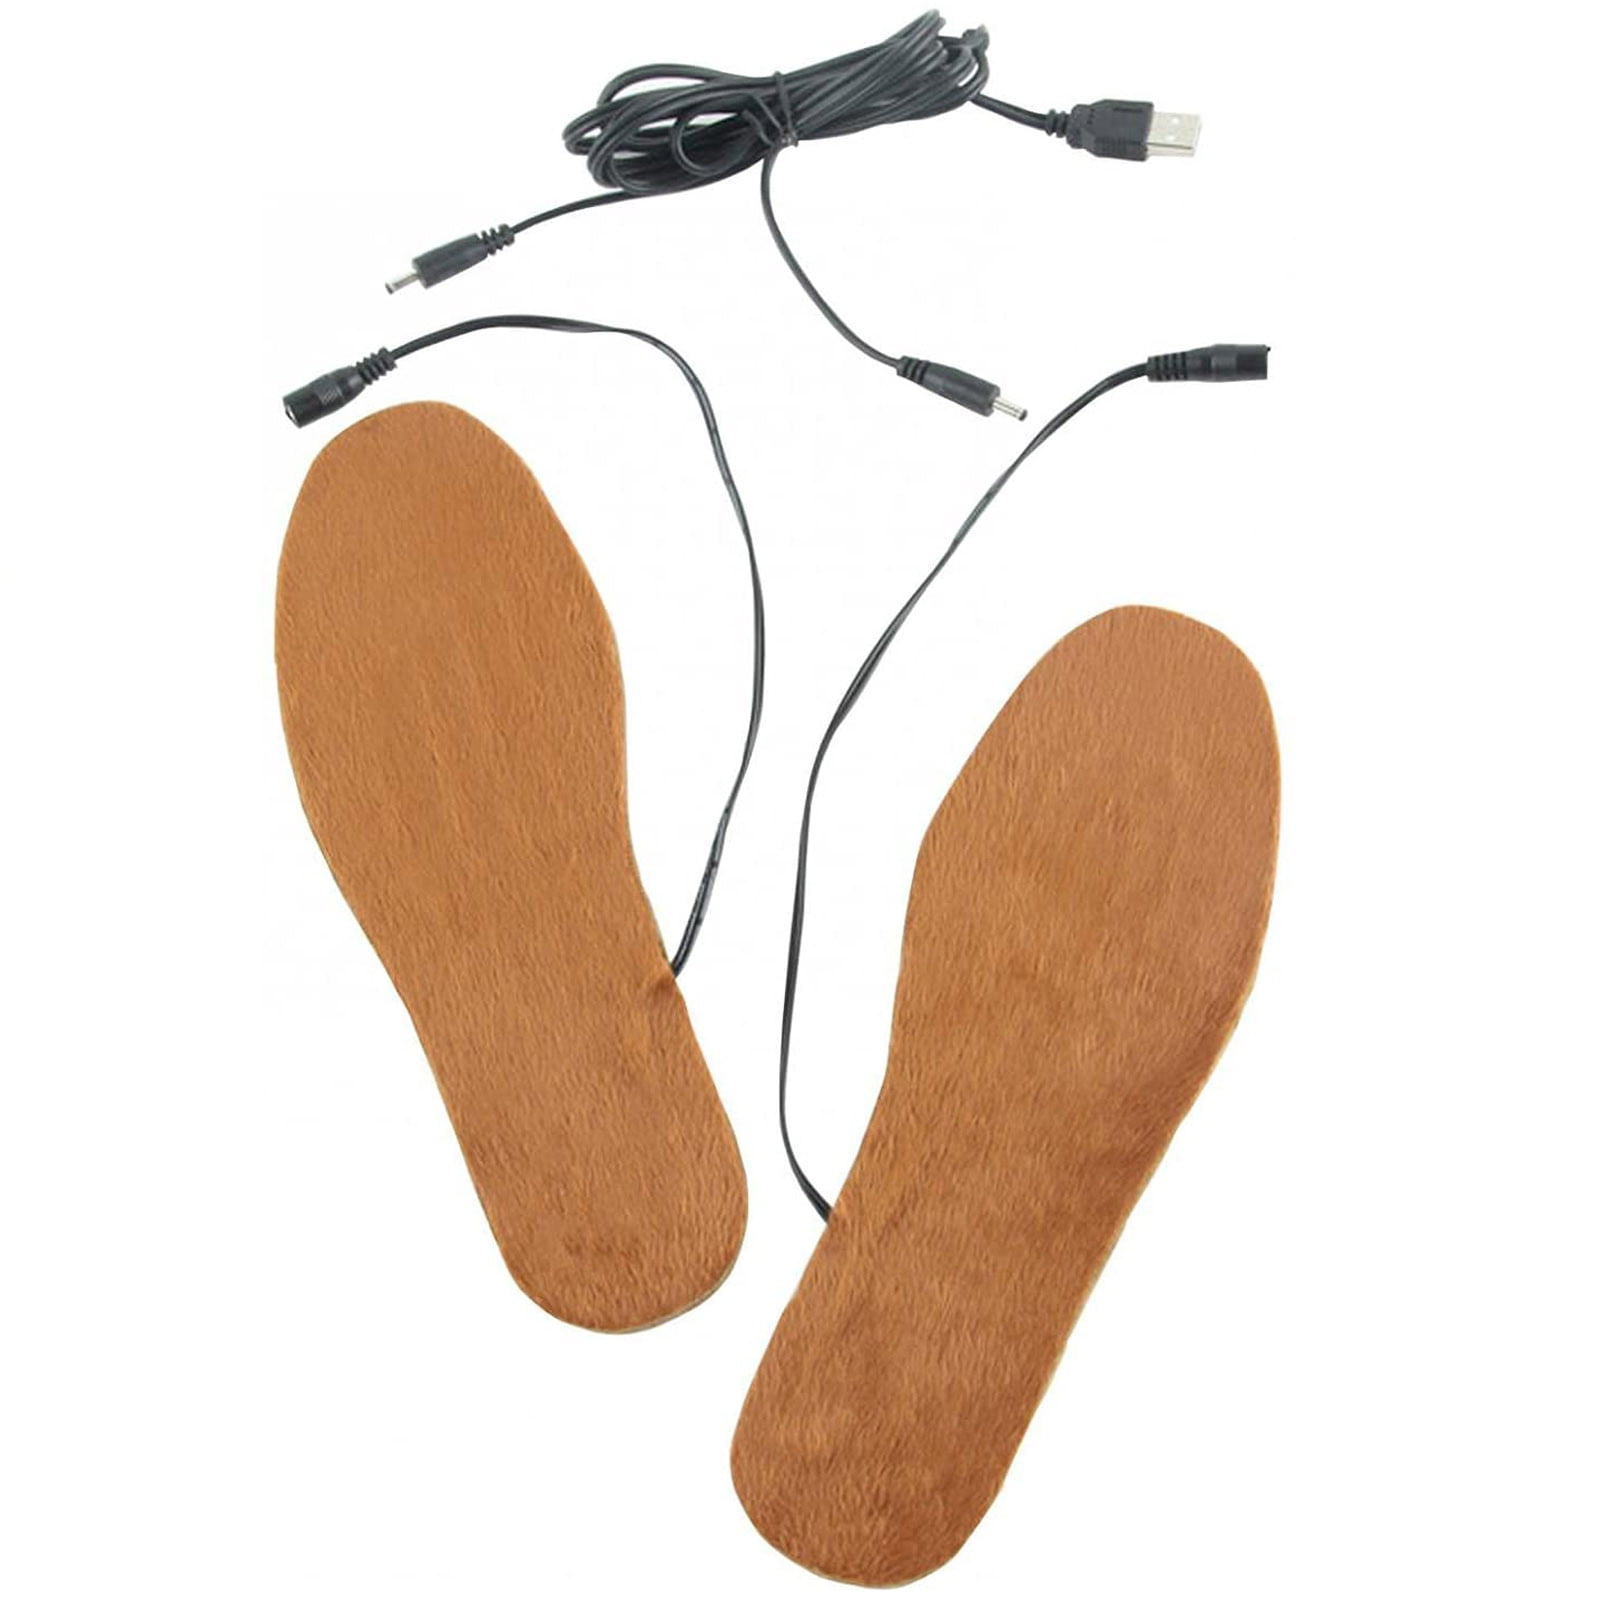 Electric Shoe Socks USB Heated Insoles Camping Skiing Winter Thermal Foot Warmer 